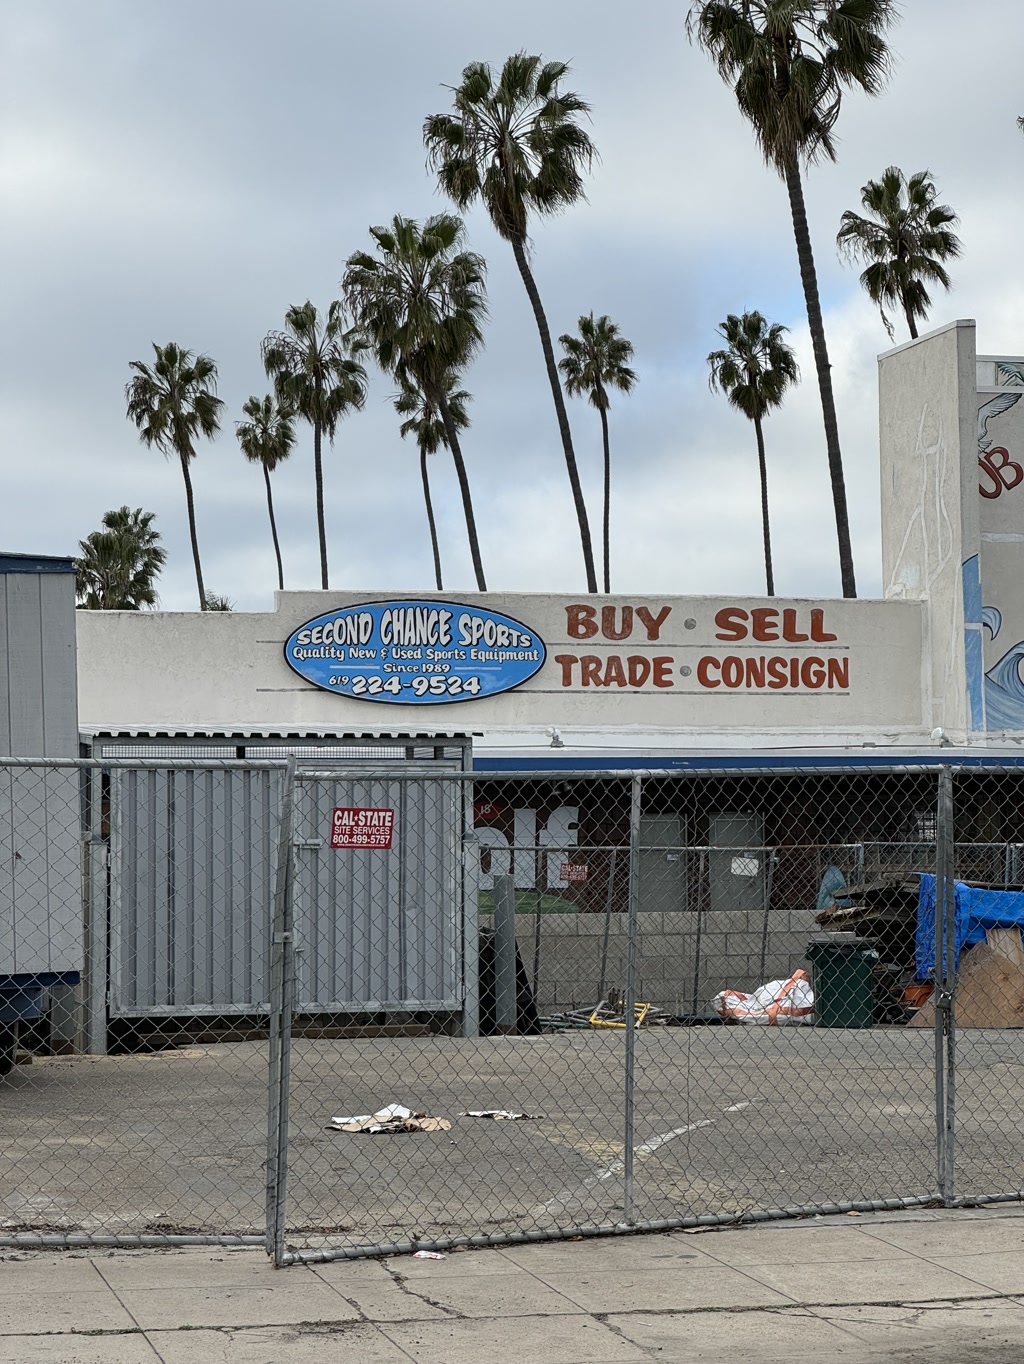 The photo shows the façade of a building with a large sign reading 'SECOND CHANCE SPORTS,' indicating a business that deals in quality new and used sports equipment since 1999. The sign also prominently features the options to 'BUY SELL TRADE CONSIGN.' A chain-link fence surrounds the area, with various objects and debris visible on the ground. In the background, against a cloudy sky, a row of tall palm trees stands above the building, contributing to a distinctly Californian atmosphere.